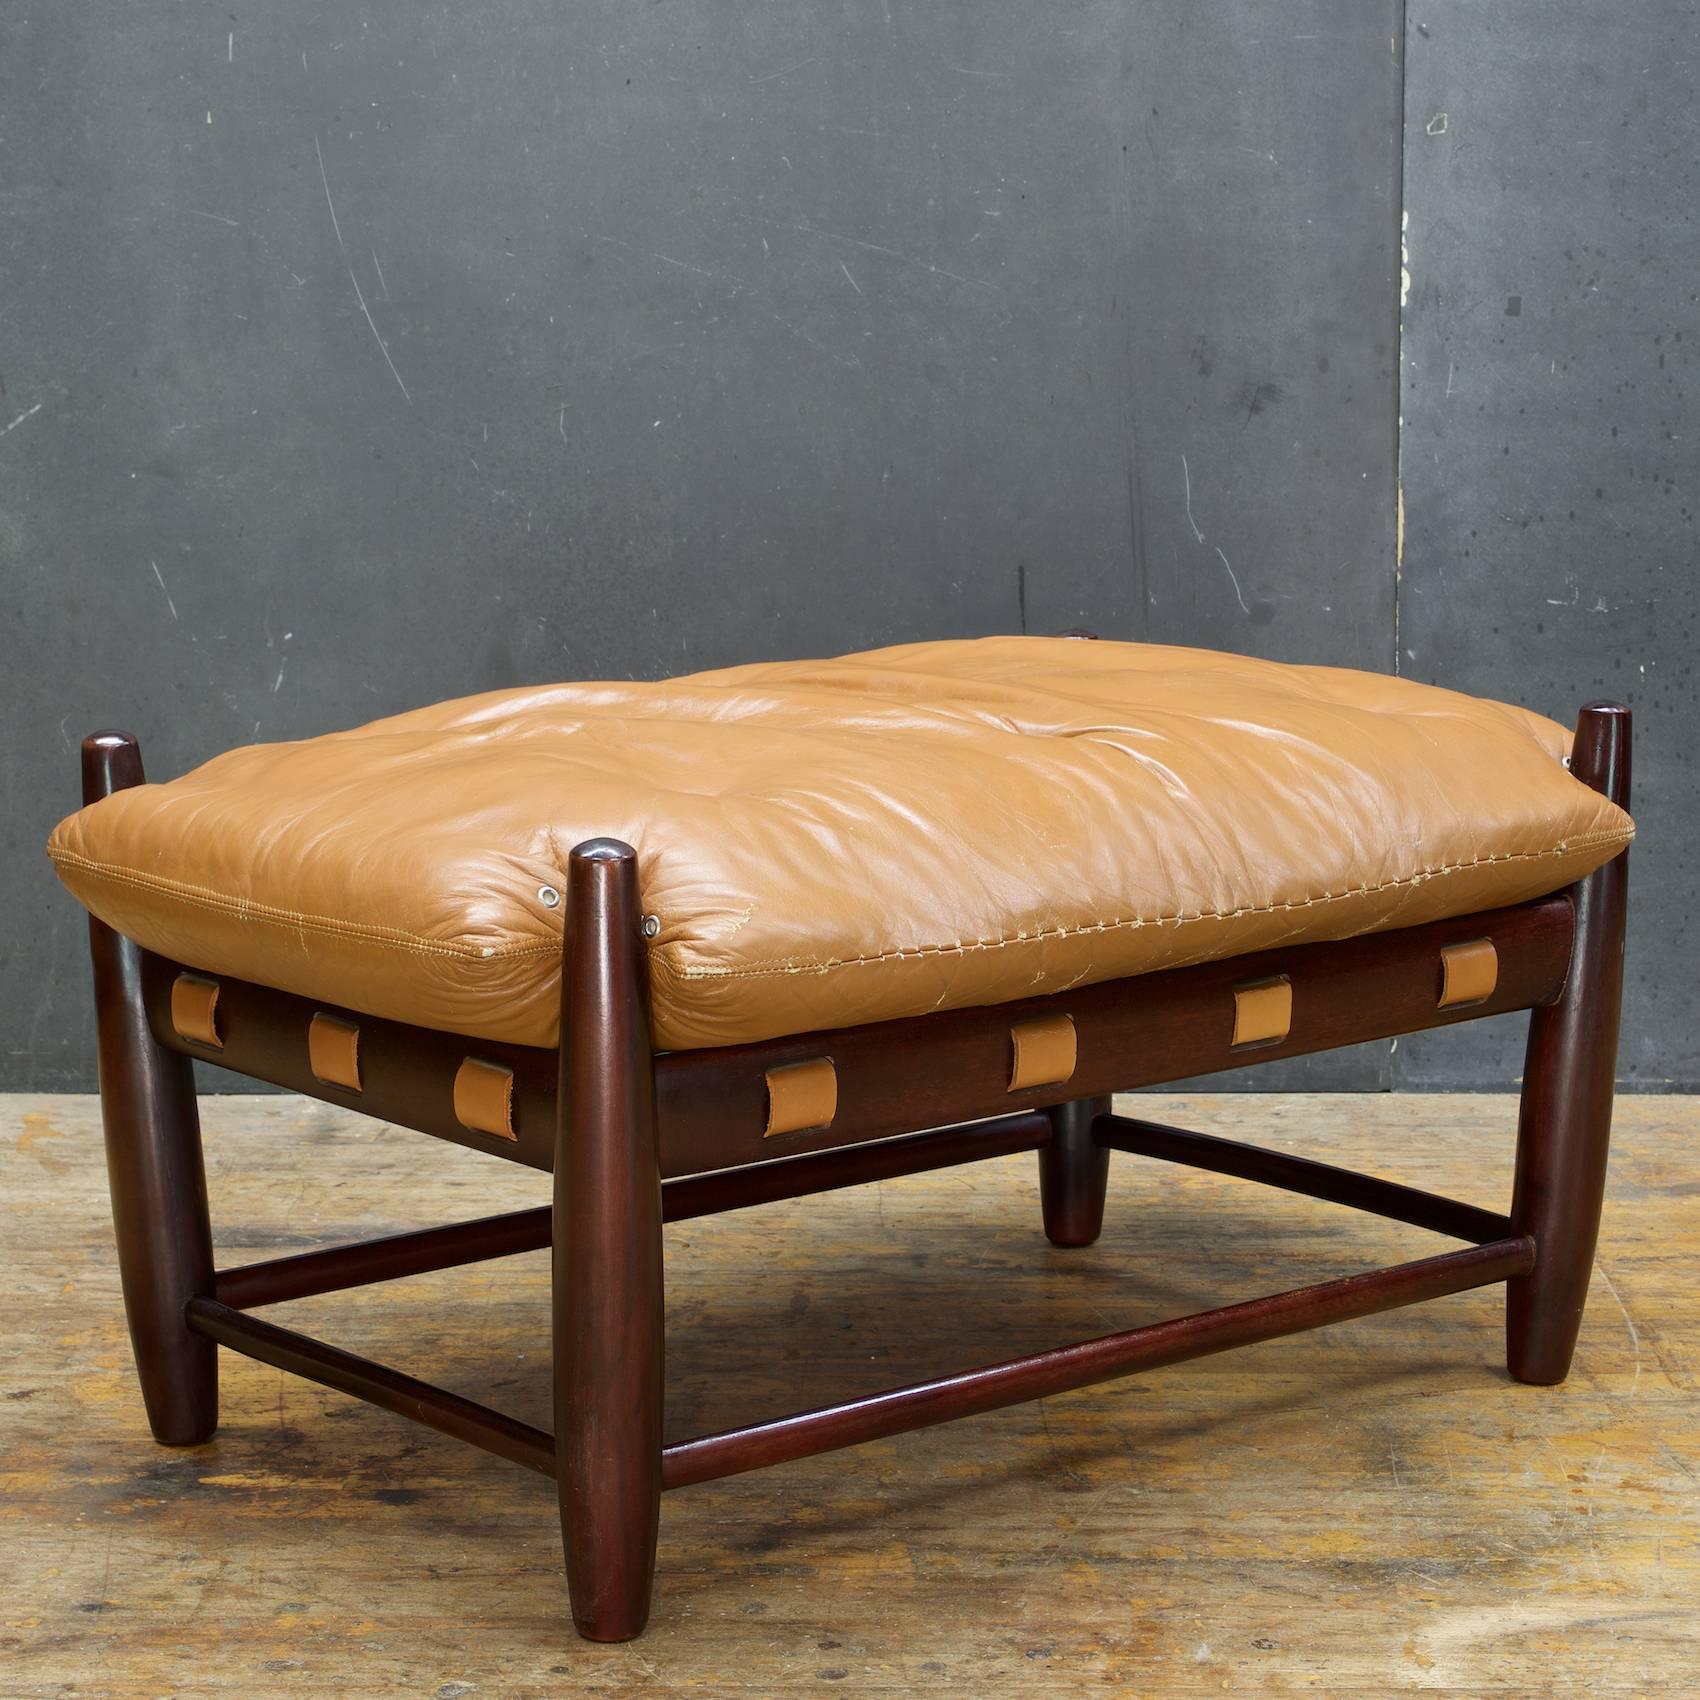 Strong and Sturdy. Poltrona Molé Ottoman, Manufacturer ISA, Designer Sergio Rodrigues. Unmarked.

W: 33 x D: 21.5 x H: 16 in.

 